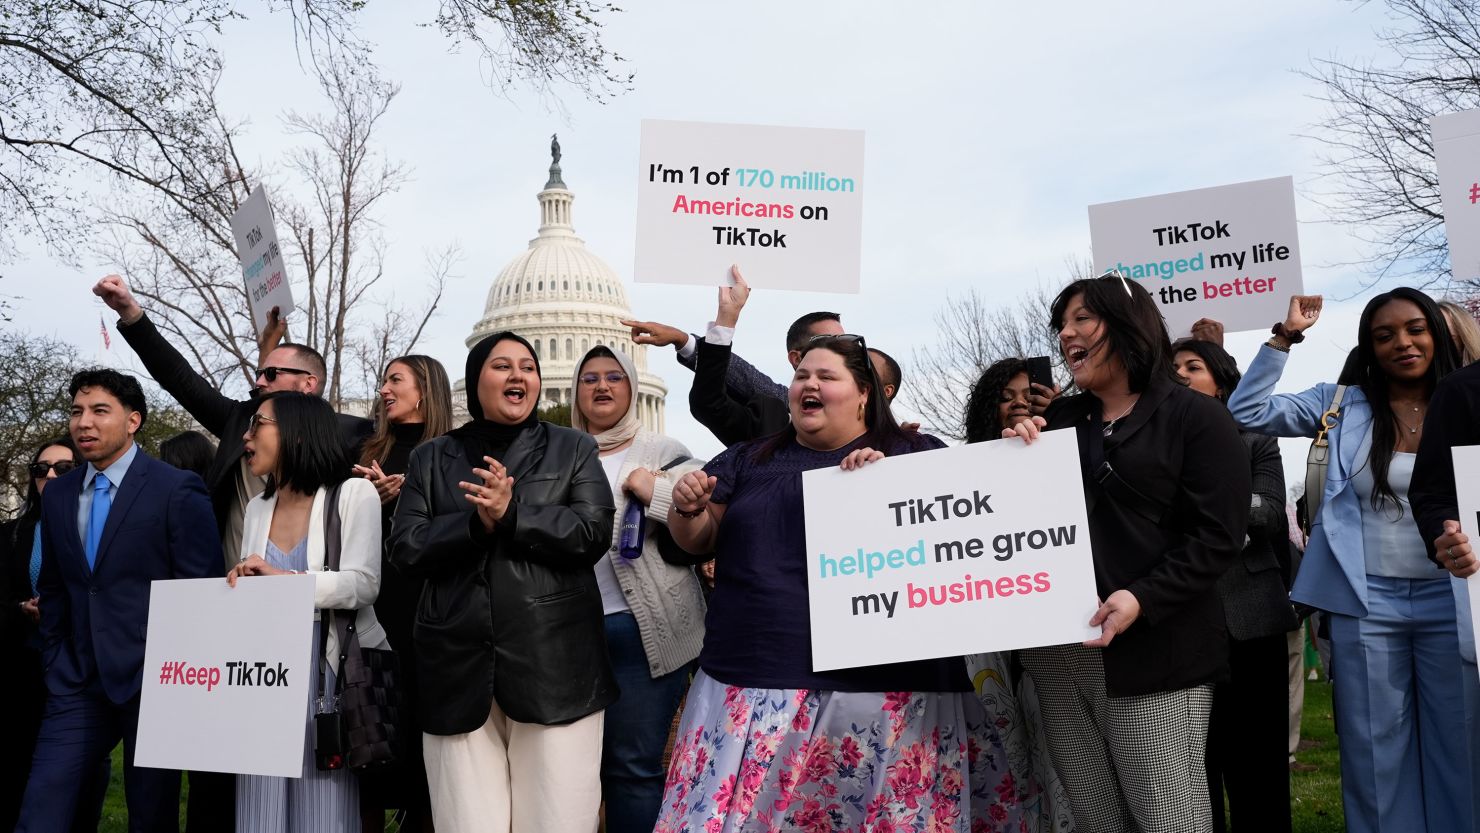 They voted for the bill that could ban TikTok. They also actively use